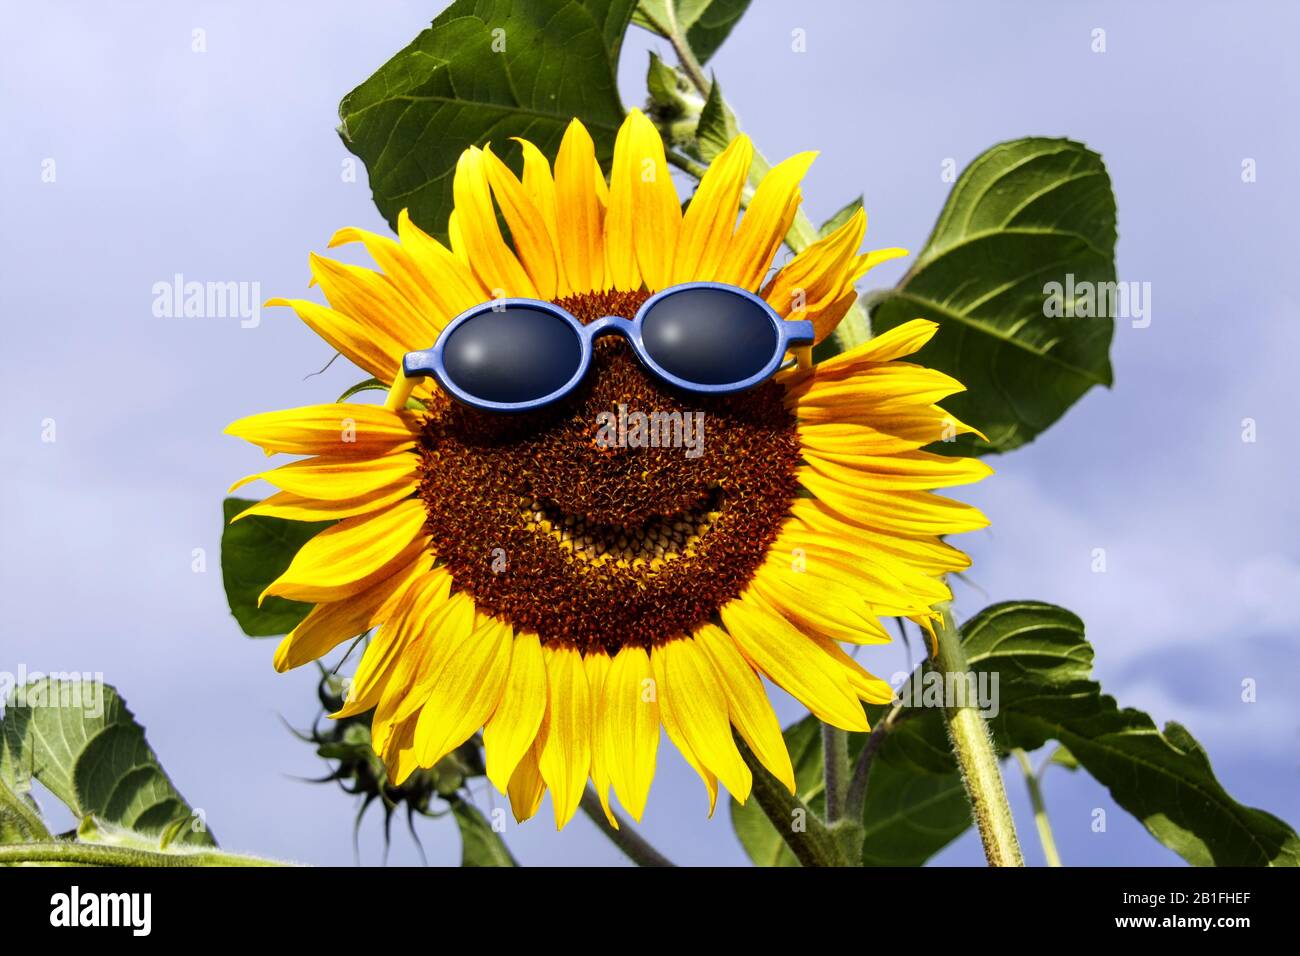 Smiling sunflower with blue sunglasses Stock Photo